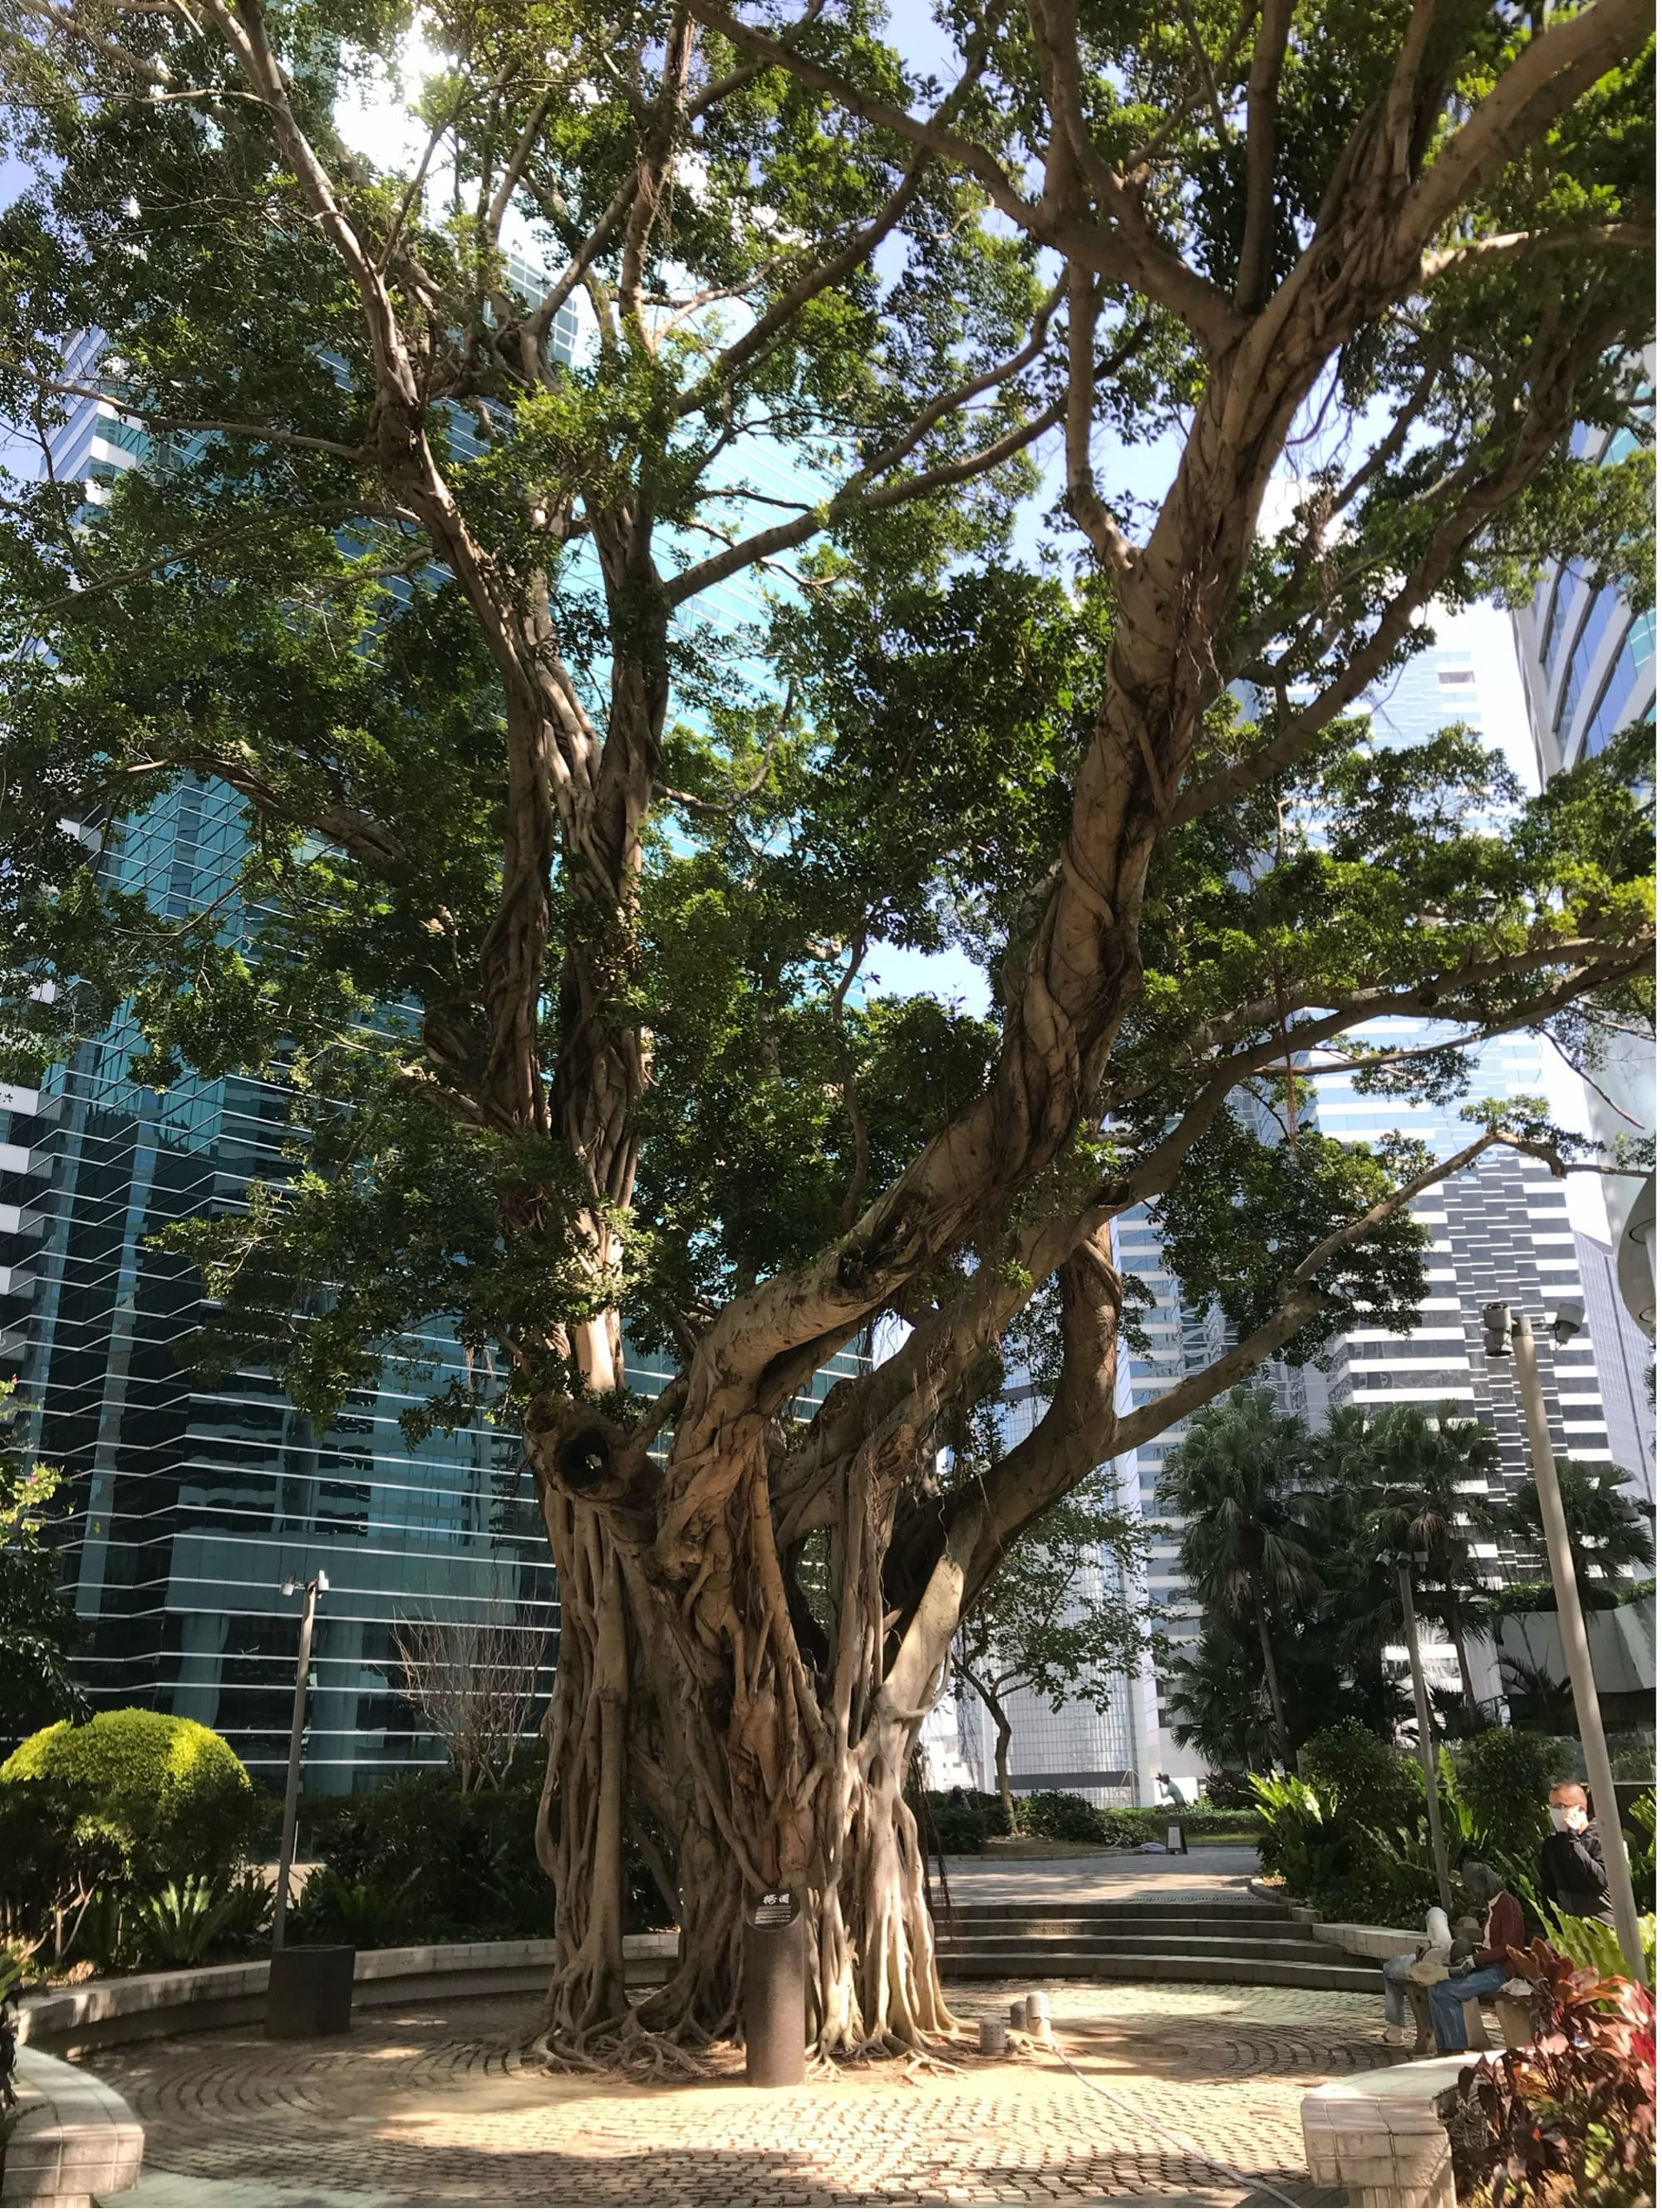 An old banyan tree with a gnarled trunk. Skyscrapers behind it.